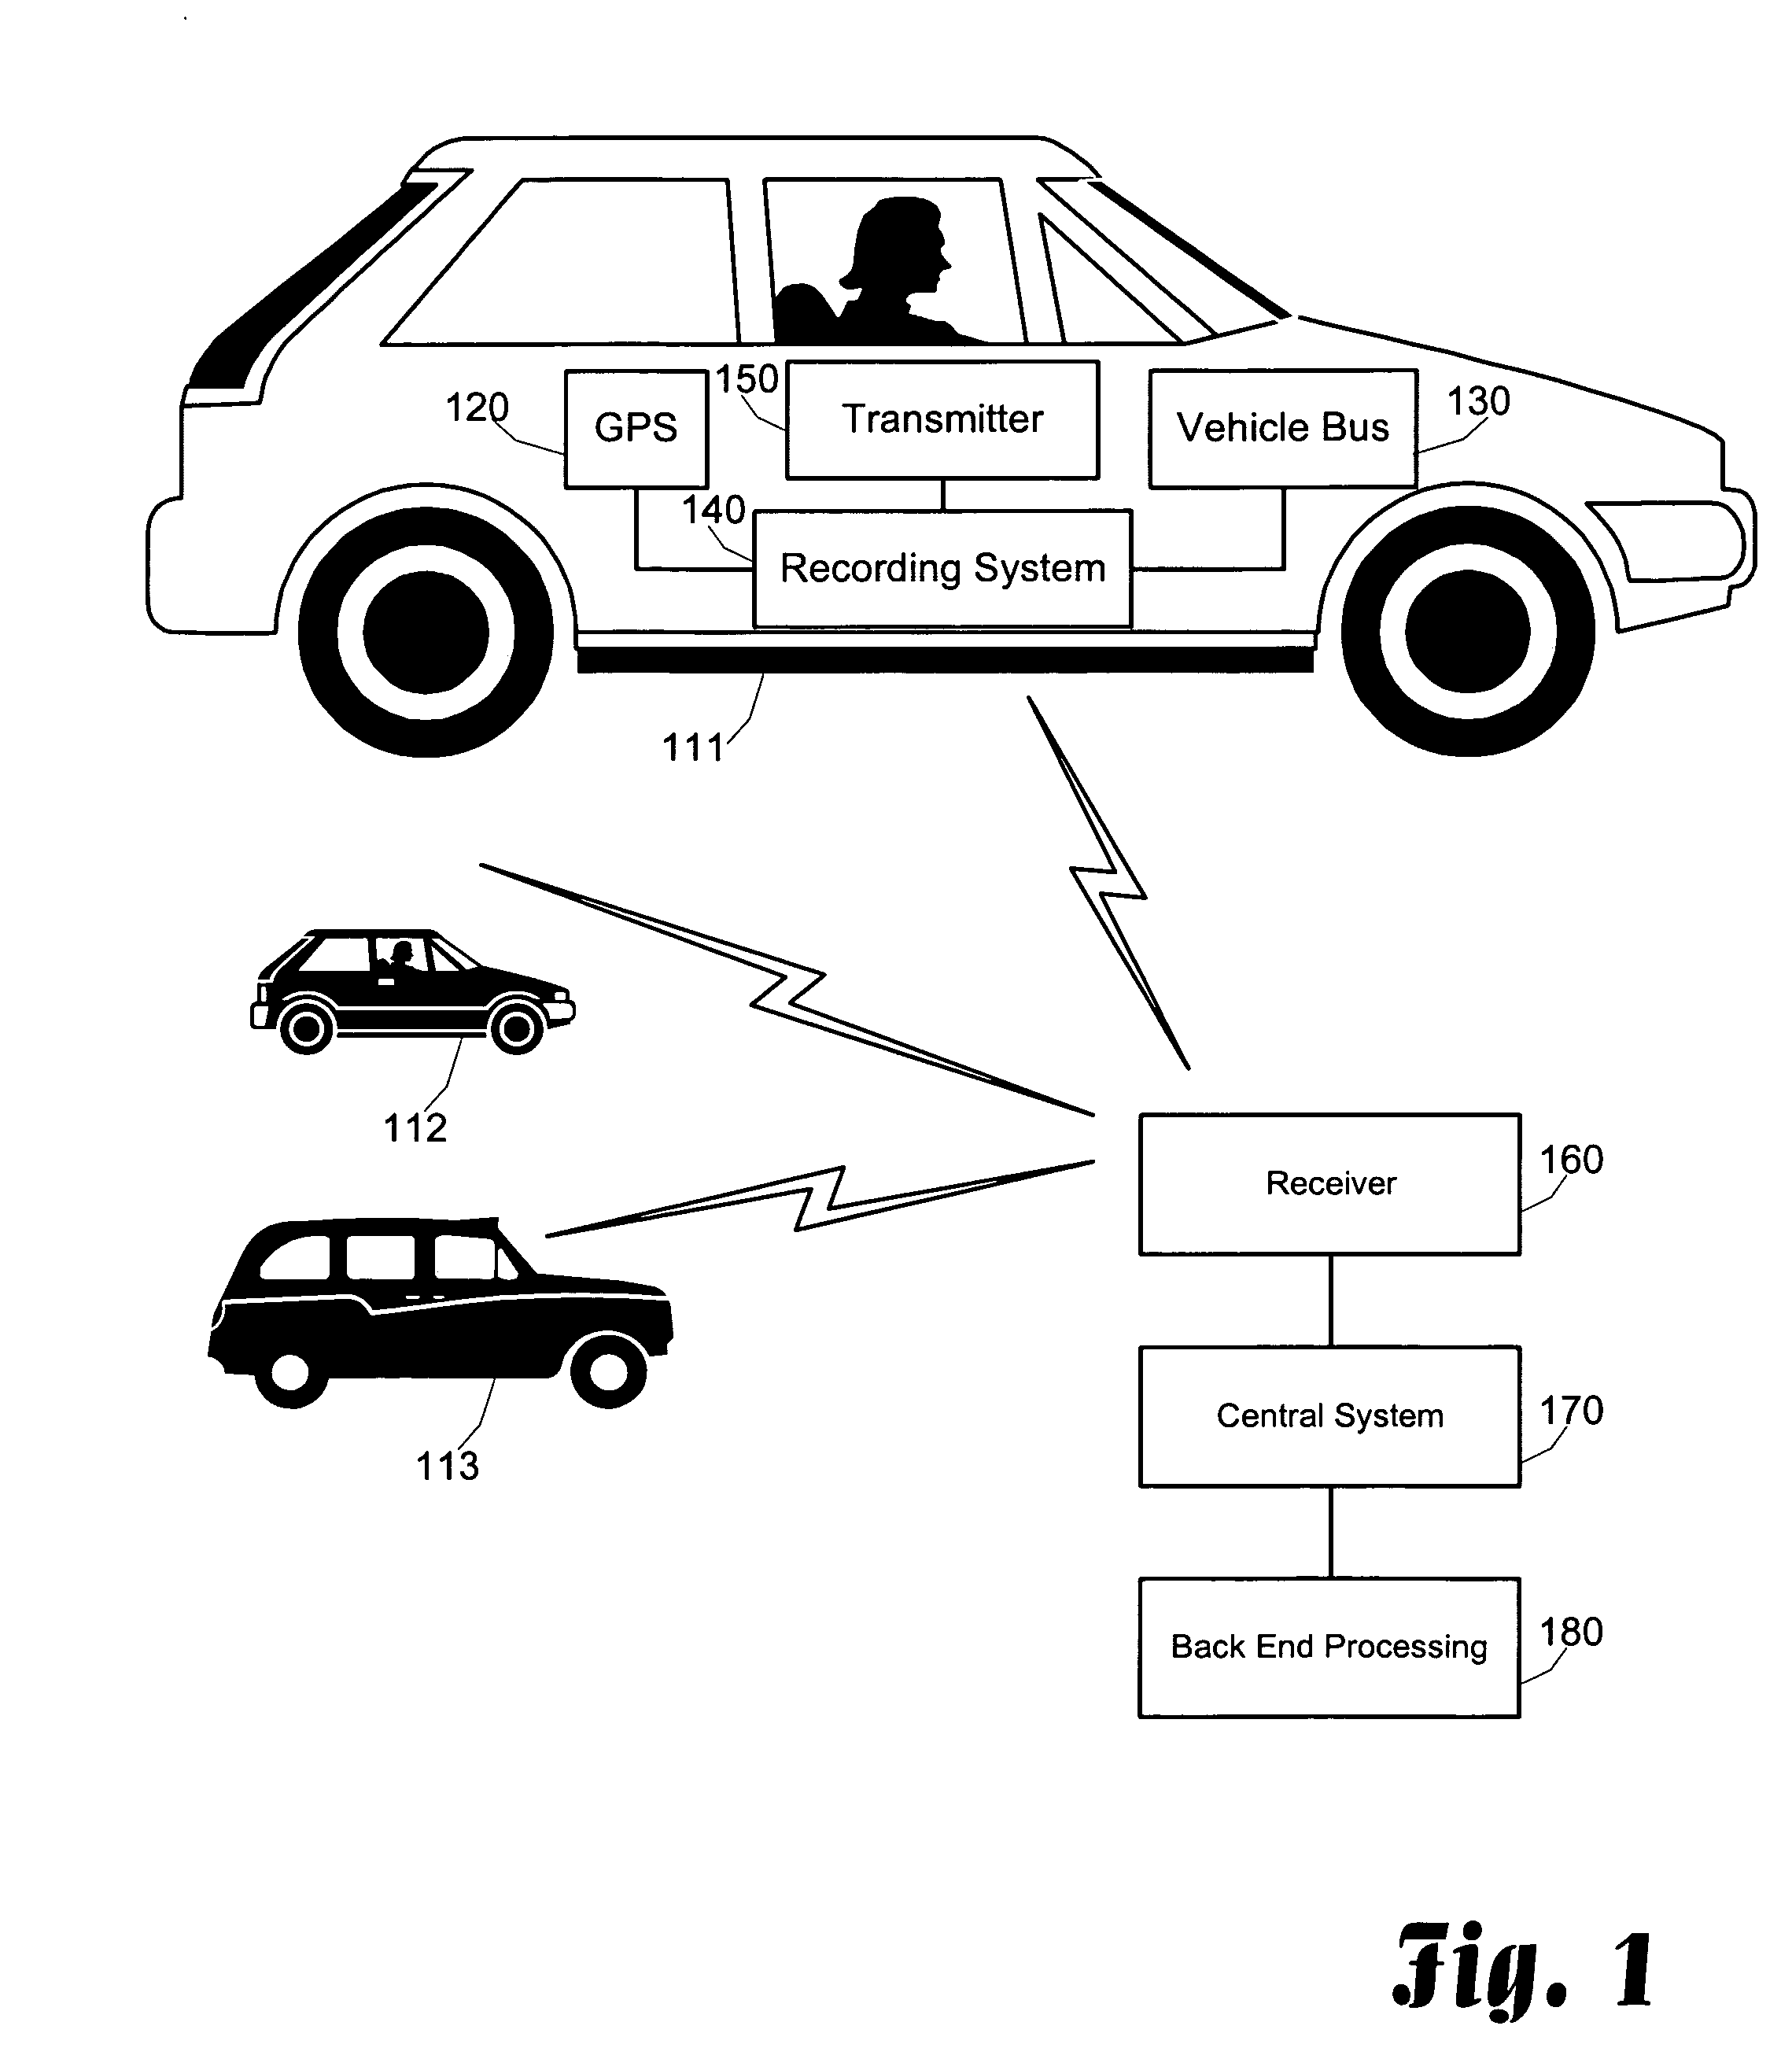 Calculation of driver score based on vehicle operation